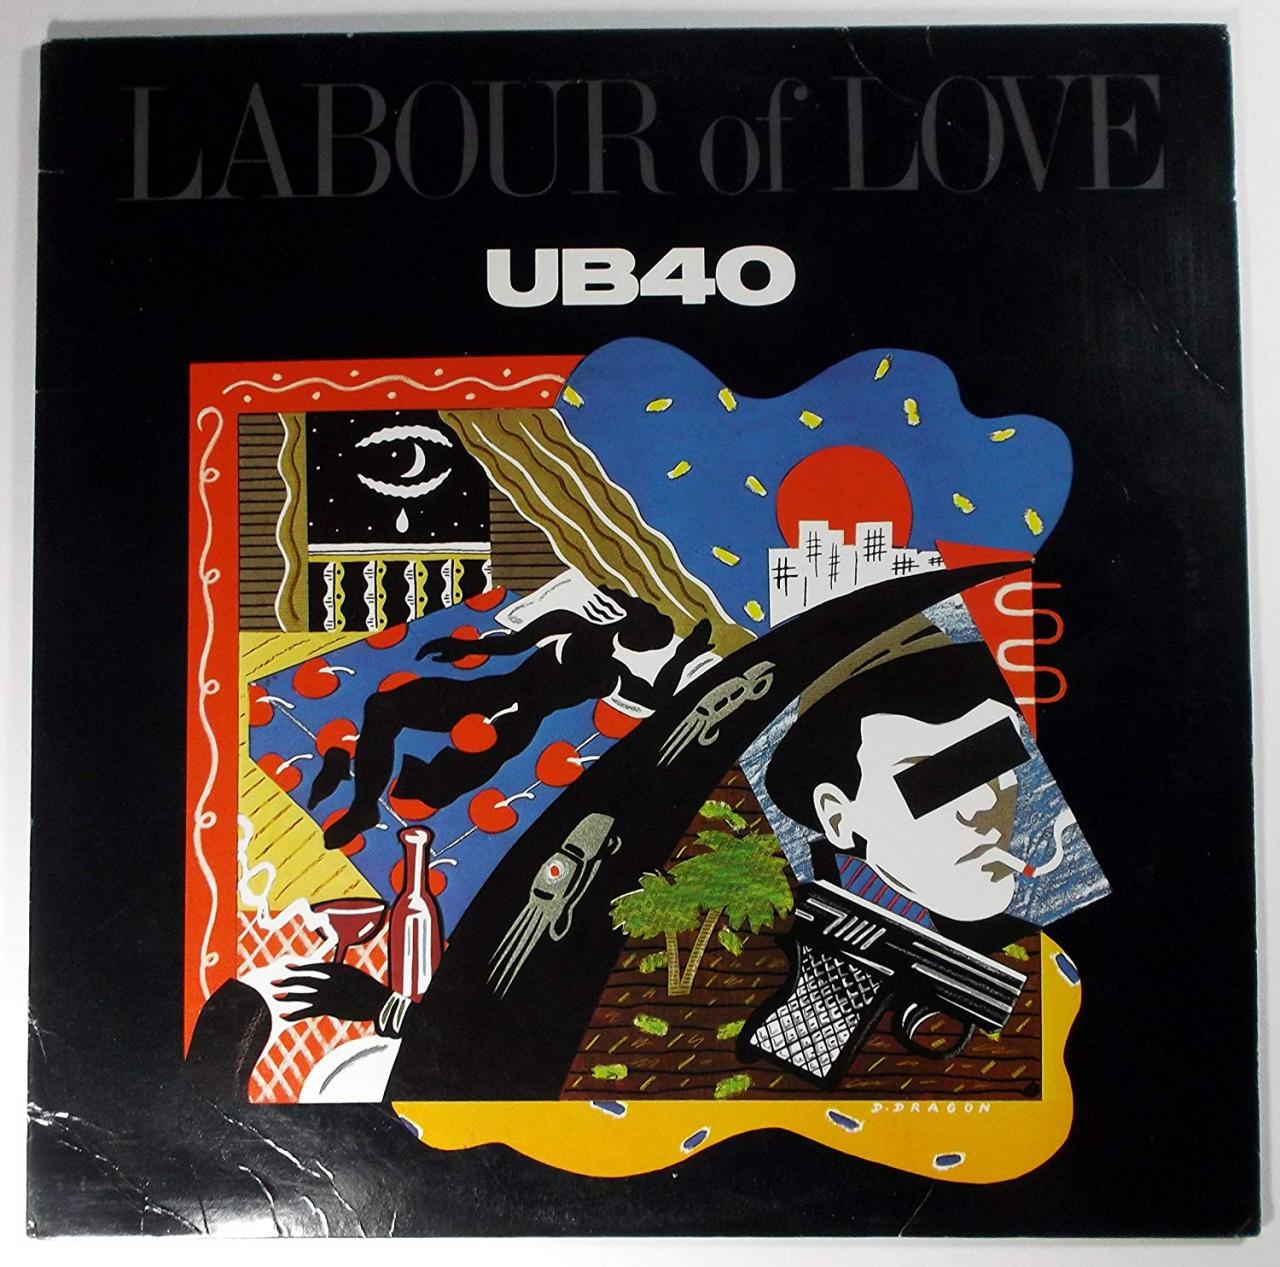 UB40 - She Caught The Train mp3 download